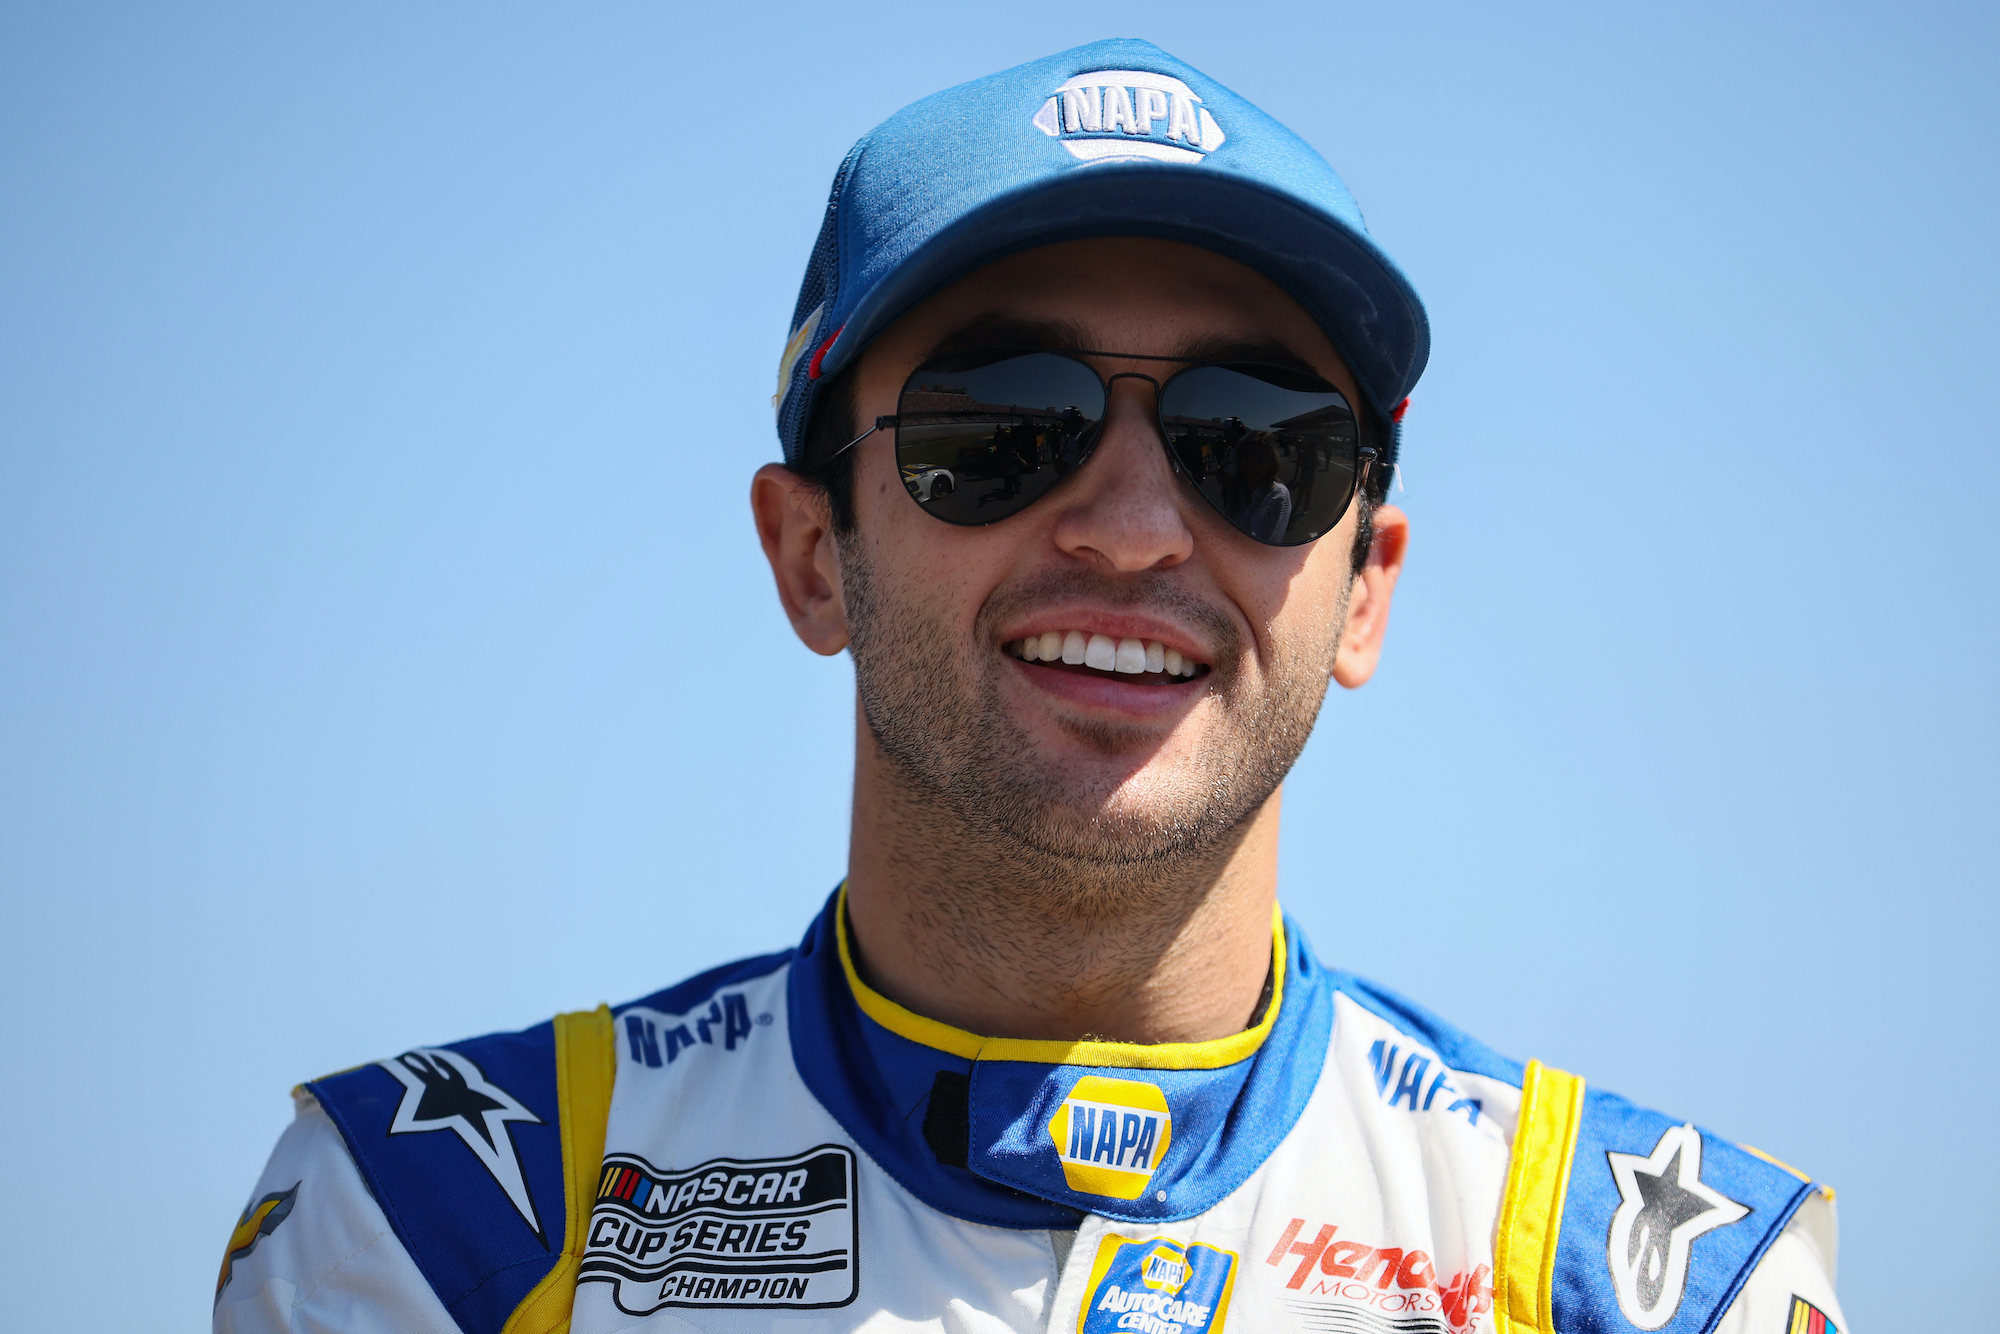 Chase Elliott looks on during qualifying for the NASCAR Cup Series GEICO 500 at Talladega Superspeedway on April 23, 2022. | Photo by James Gilbert/Getty Images